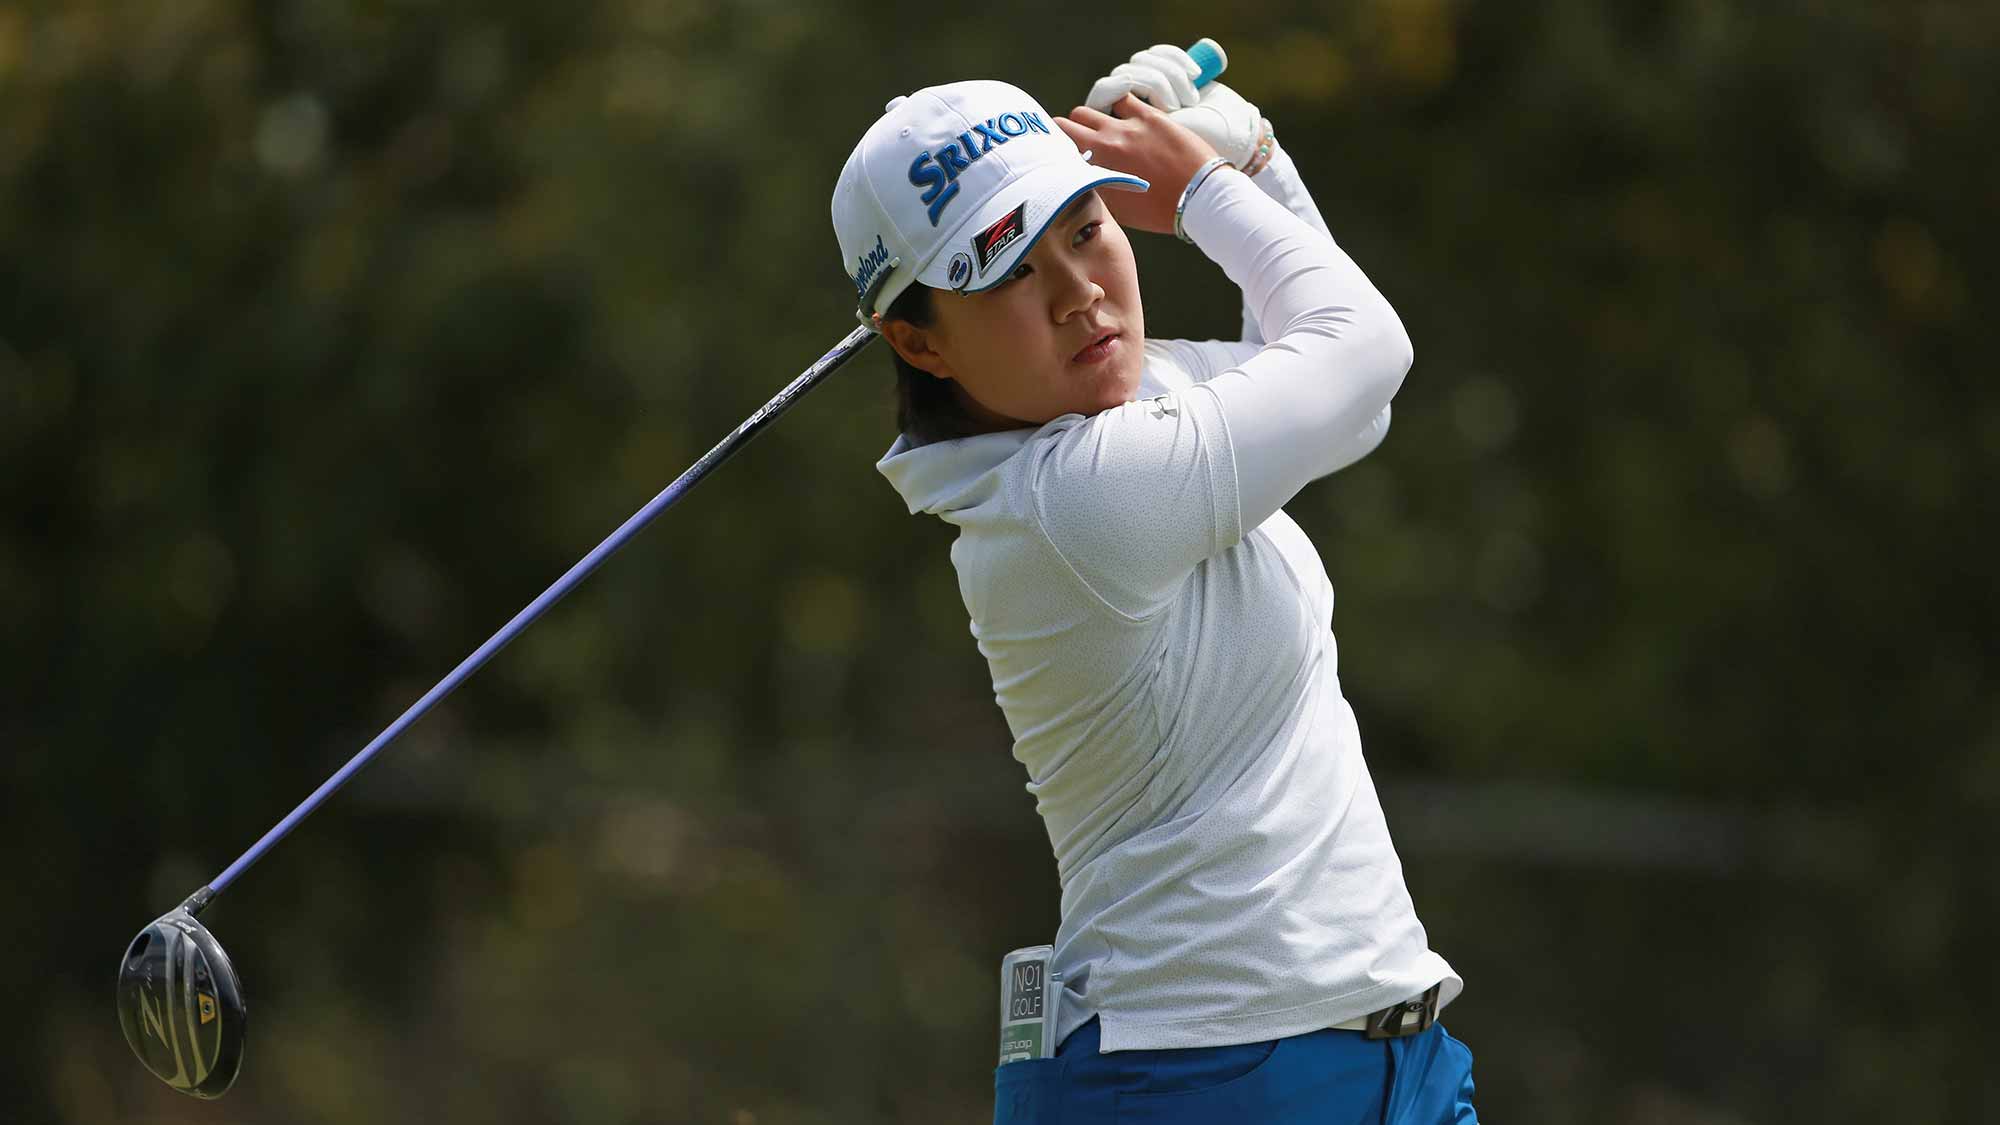 Nasa Hataoka of Japan watches her tee shot on the second hole during the third round of the LPGA MEDIHEAL Championship at Lake Merced Golf Club on April 28, 2018 in Daly City, California